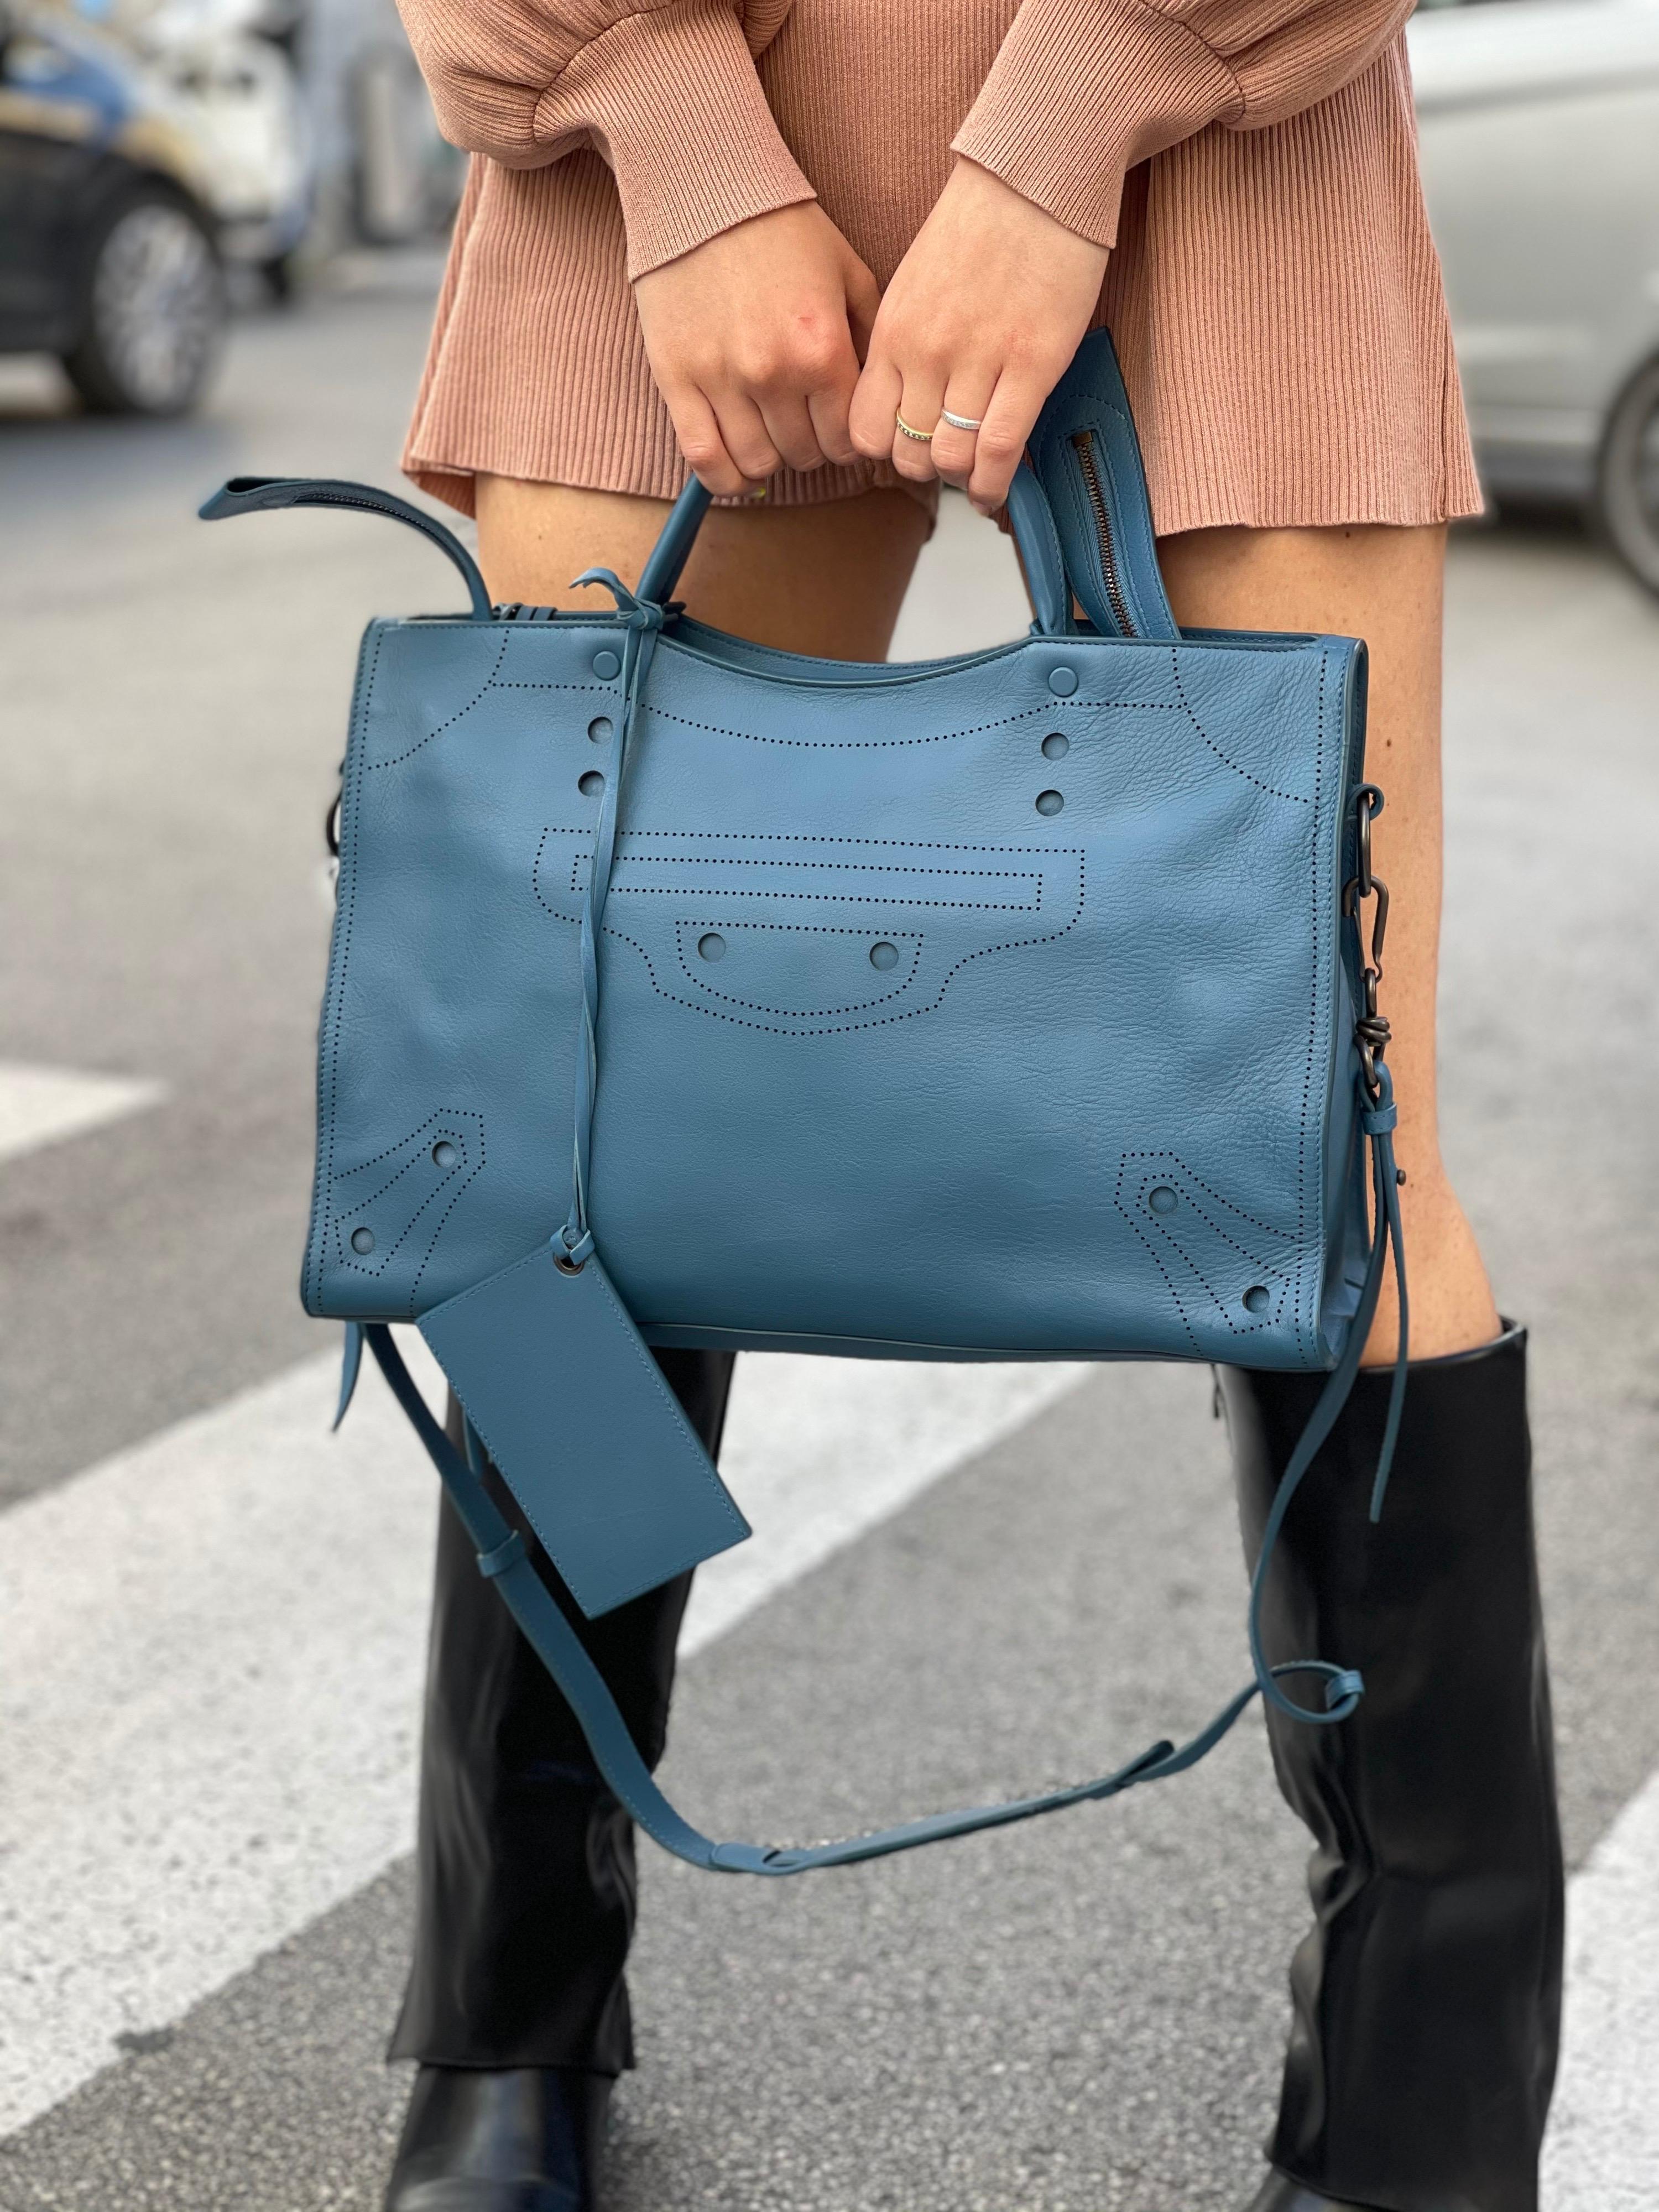 City model Balenciaga bag made of blue leather. Equipped with double handle and removable shoulder strap. Magnetic closure and zip, internally quite roomy. The bag is in excellent condition.